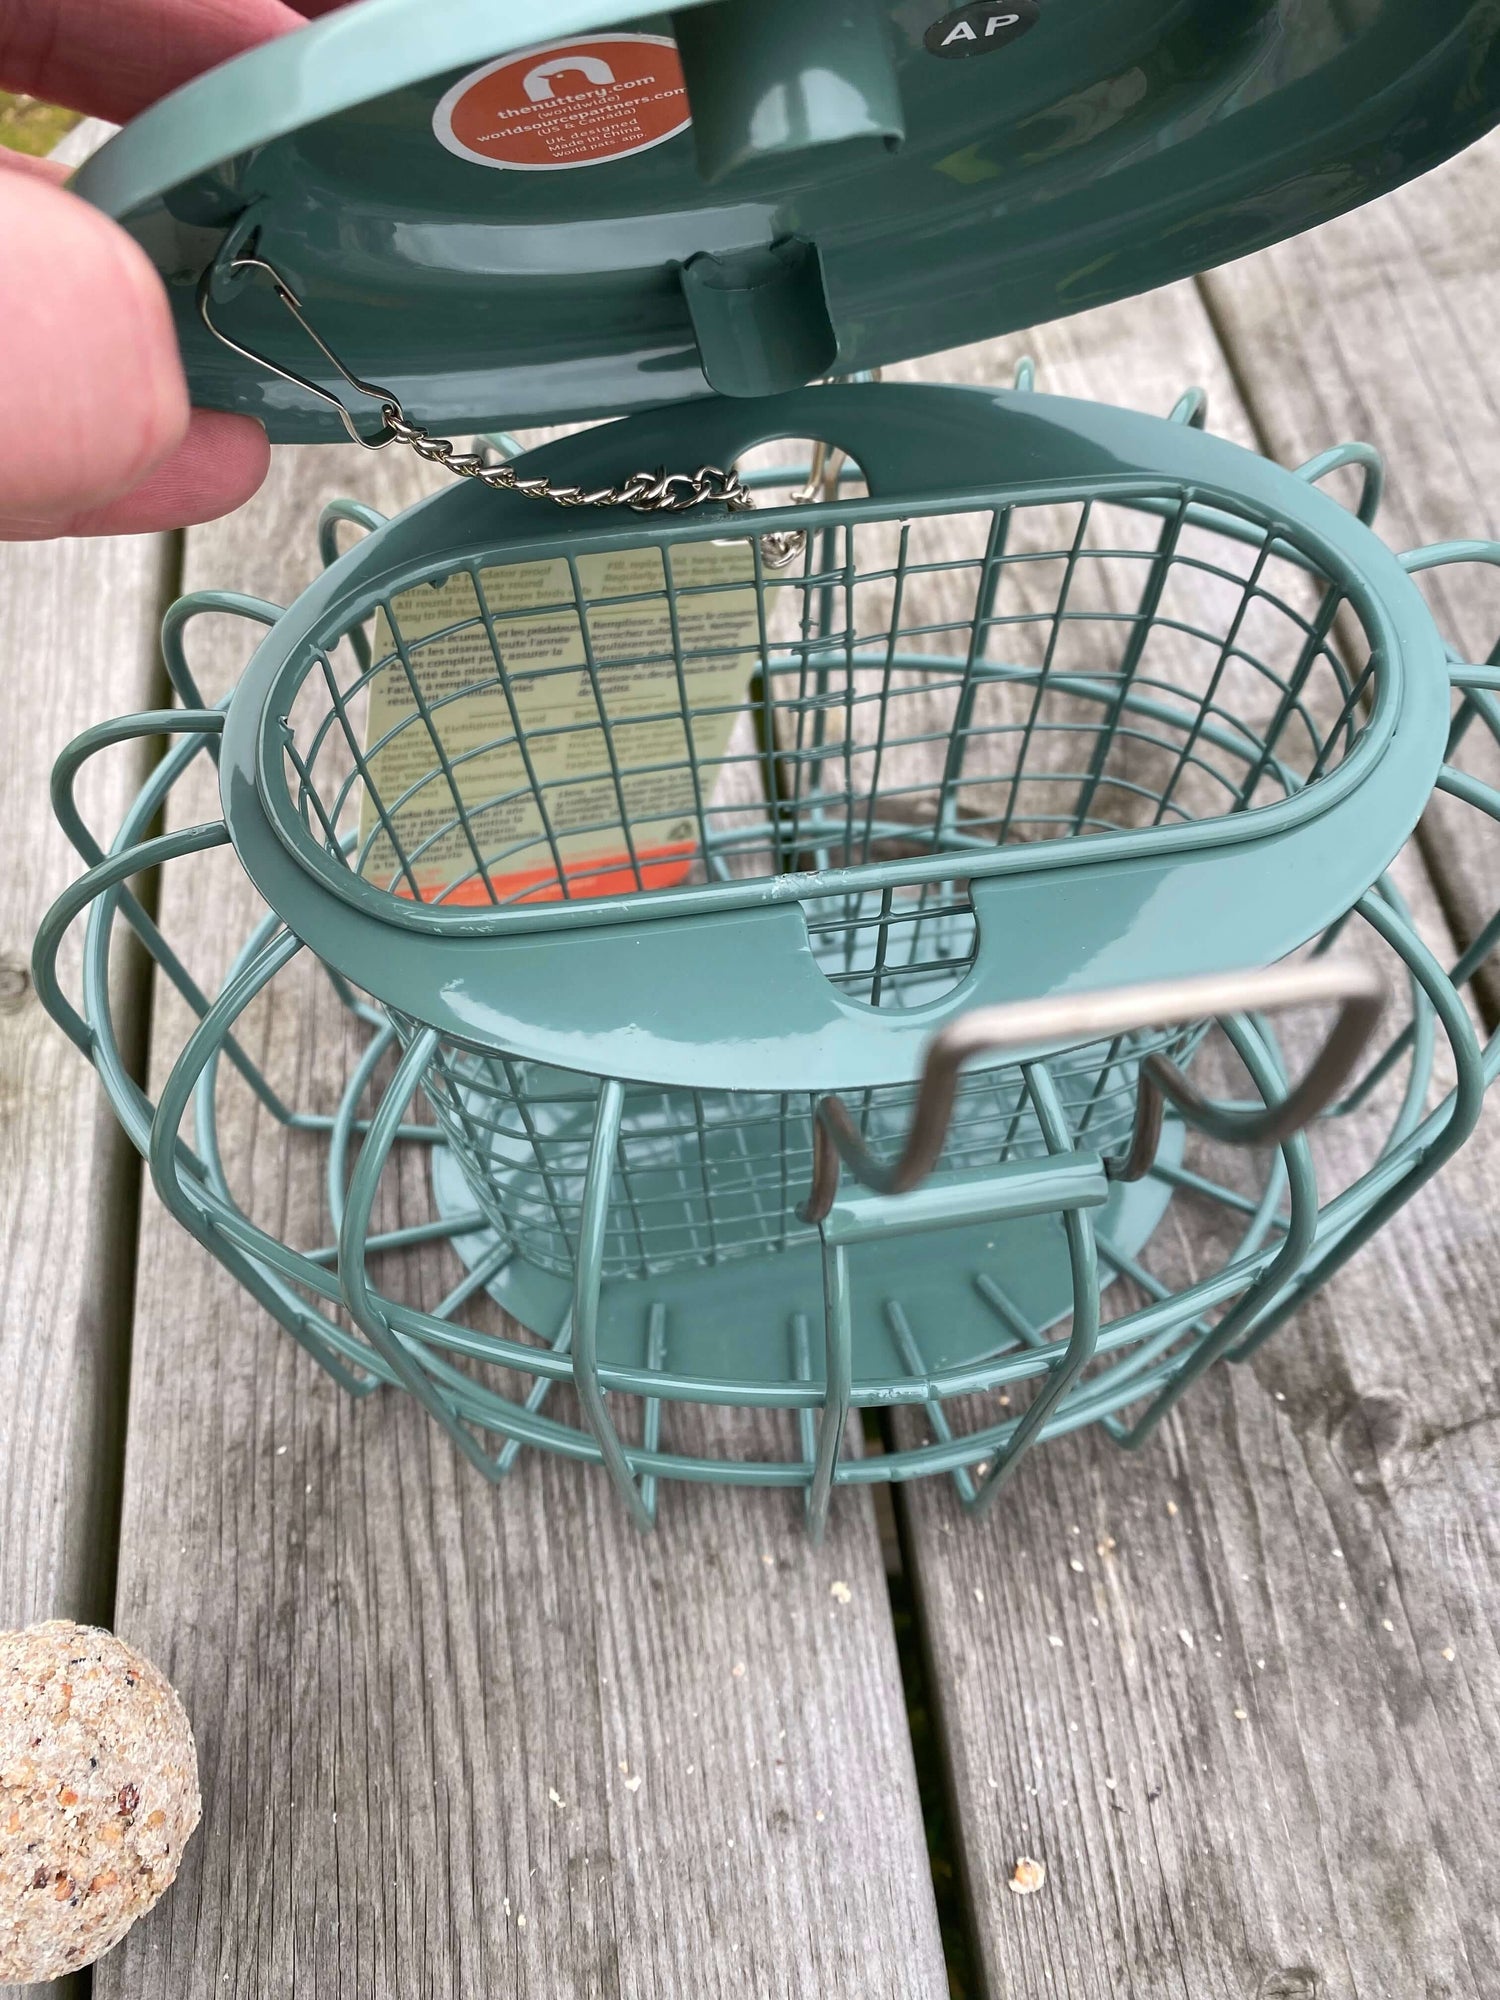 Caged suet feeder which holds suet feasts and small fat balls . Has special designed handle which locks lid